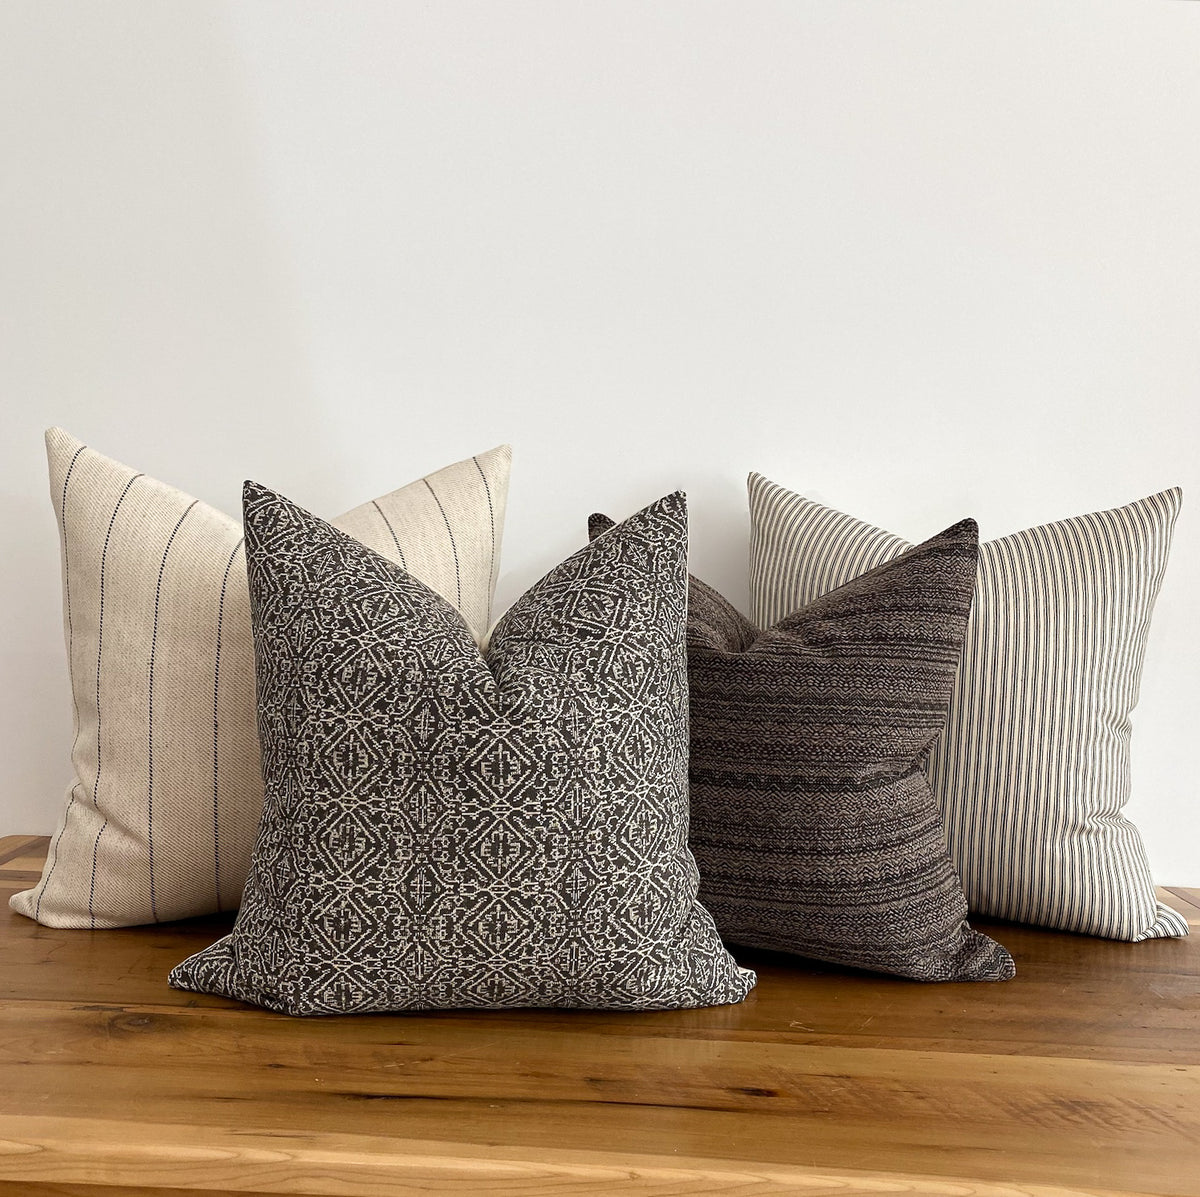 Throw Pillows Made From Napkins - The Chronicles of Home